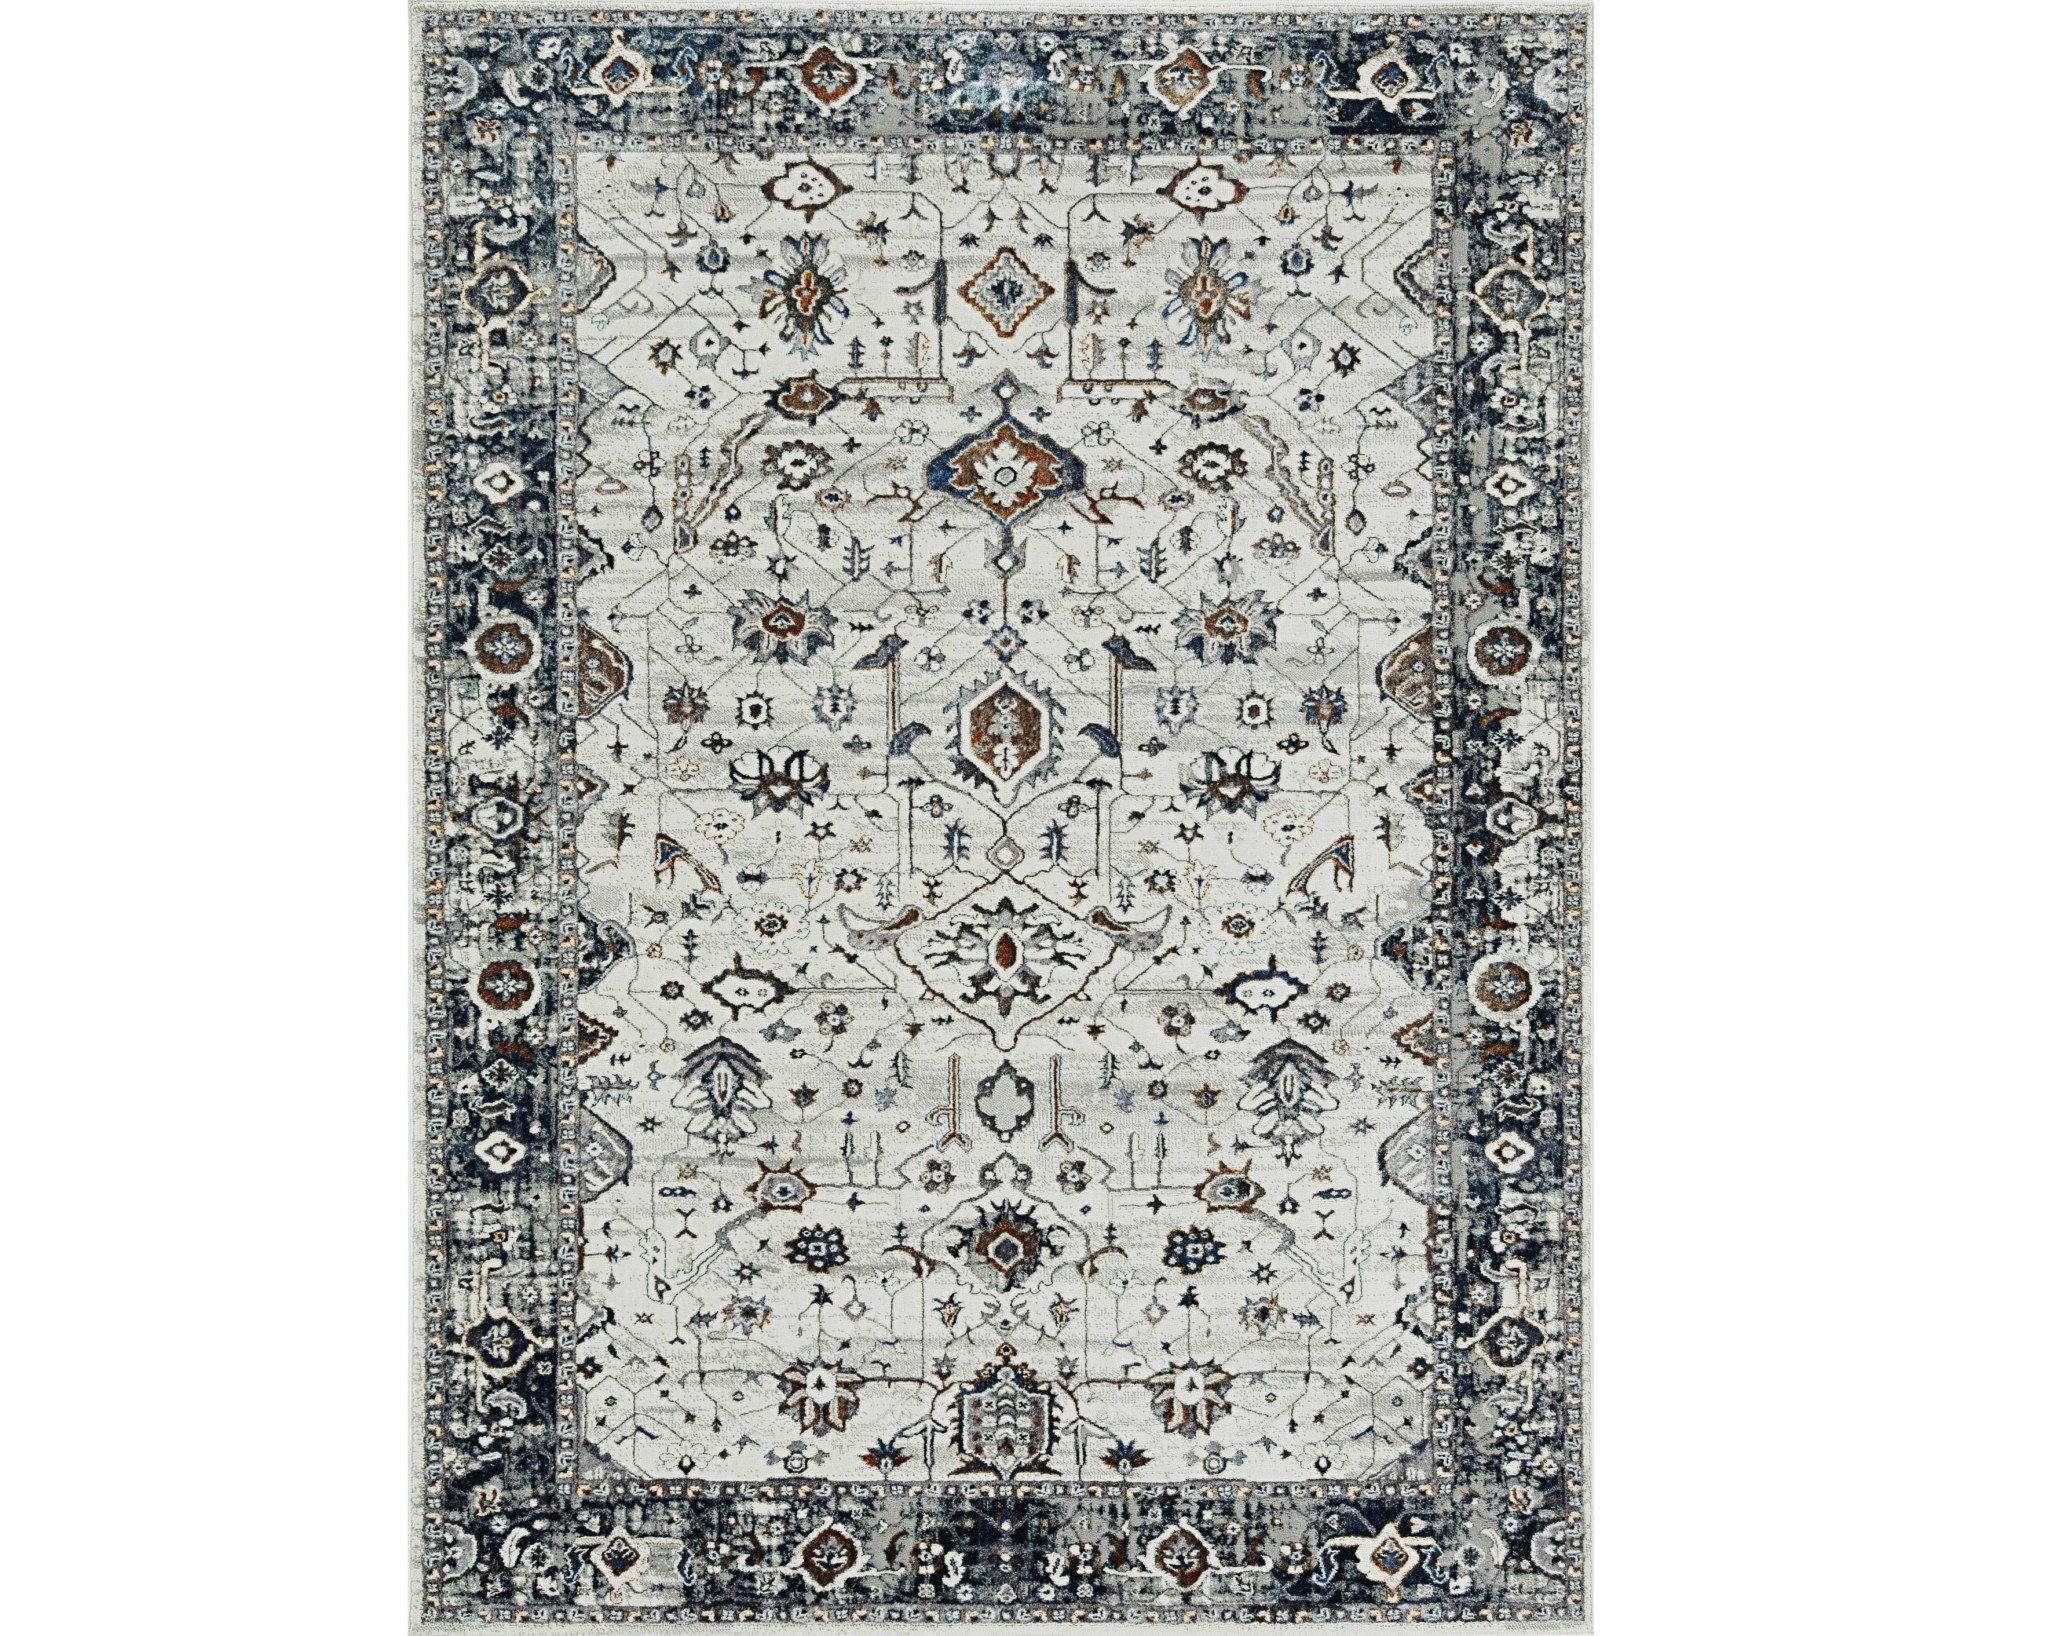 3' X 5' Ivory Or Grey Bordered Area Rug-374764-1